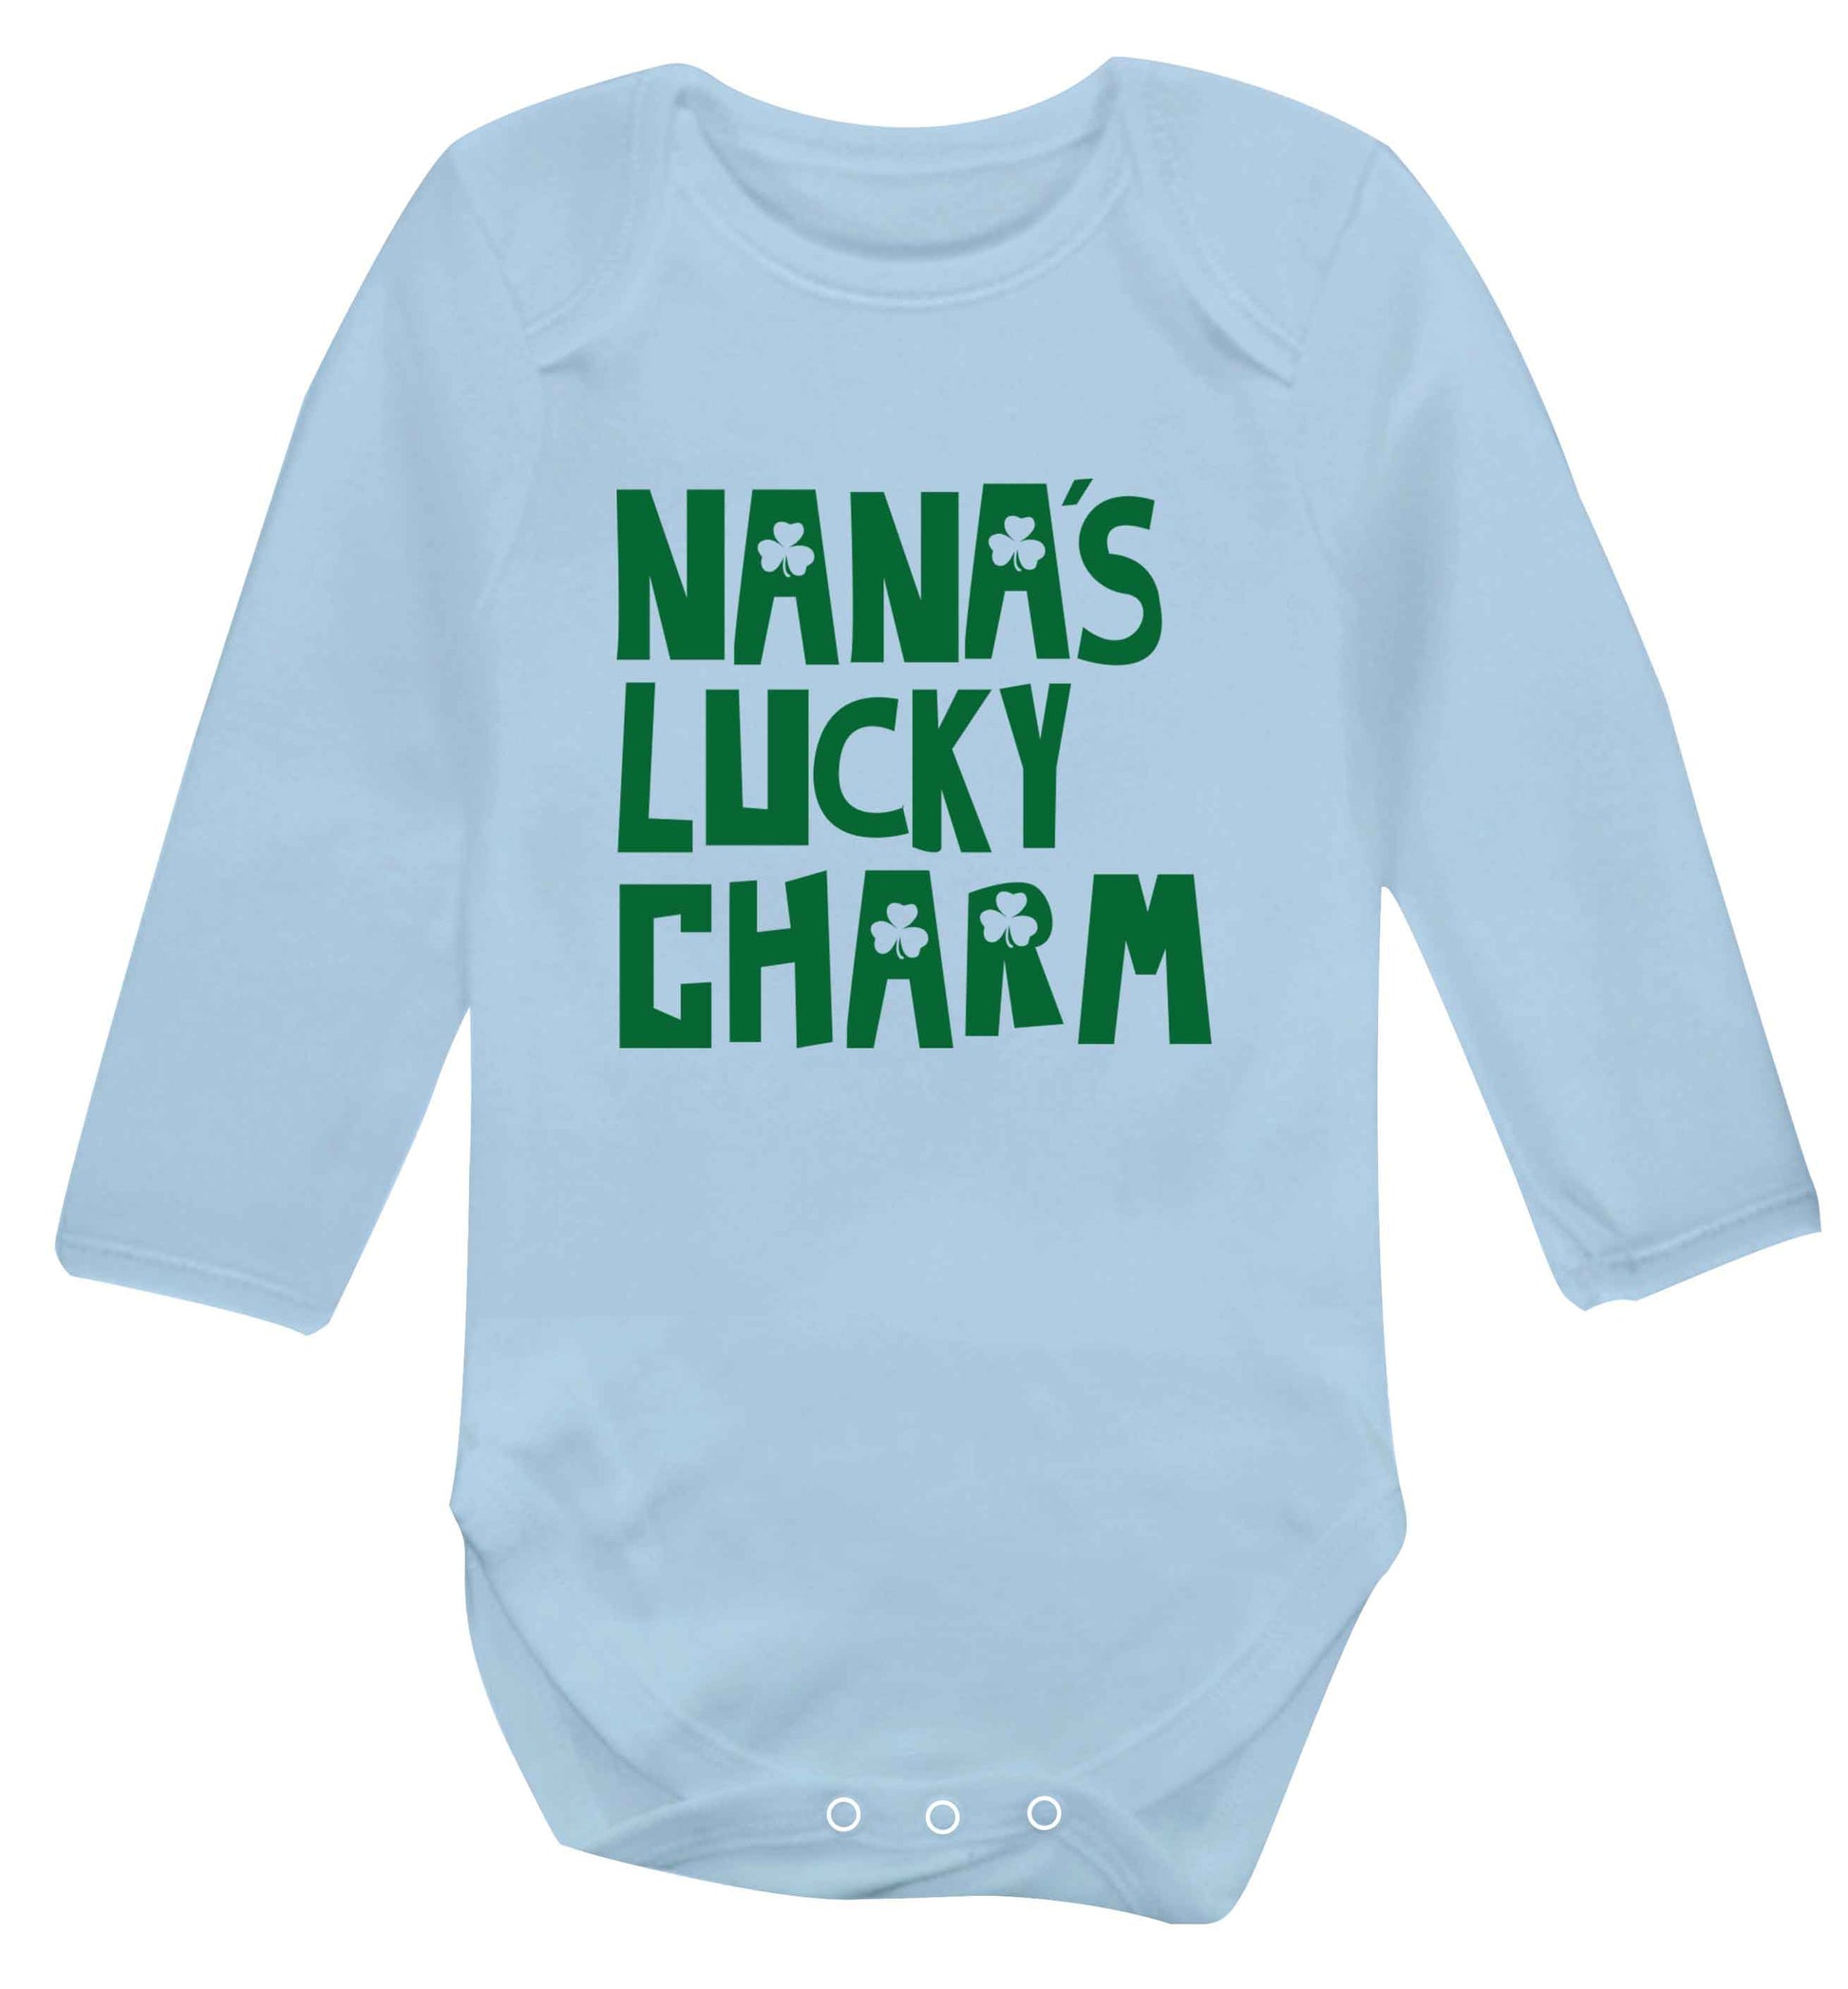 Nana's lucky charm baby vest long sleeved pale blue 6-12 months